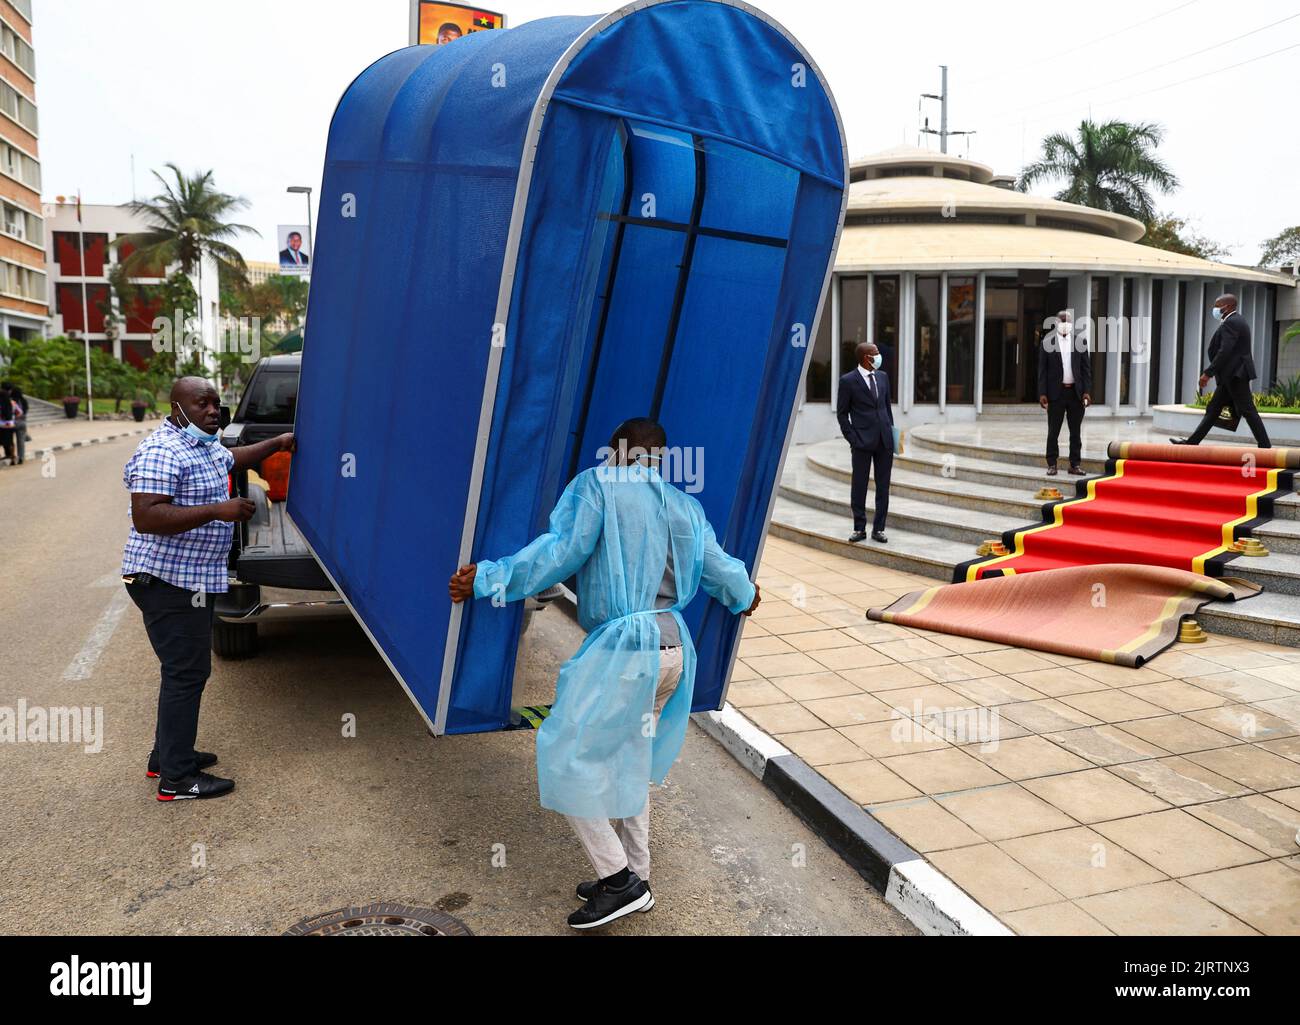 A worker wearing protective clothing loads equipment after Angola's president and leader of the ruling MPLA Joao Lourenco left after a meeting at the party's headquarters in the capital Luanda, Angola August 26, 2022. REUTERS/Siphiwe Sibeko Stock Photo